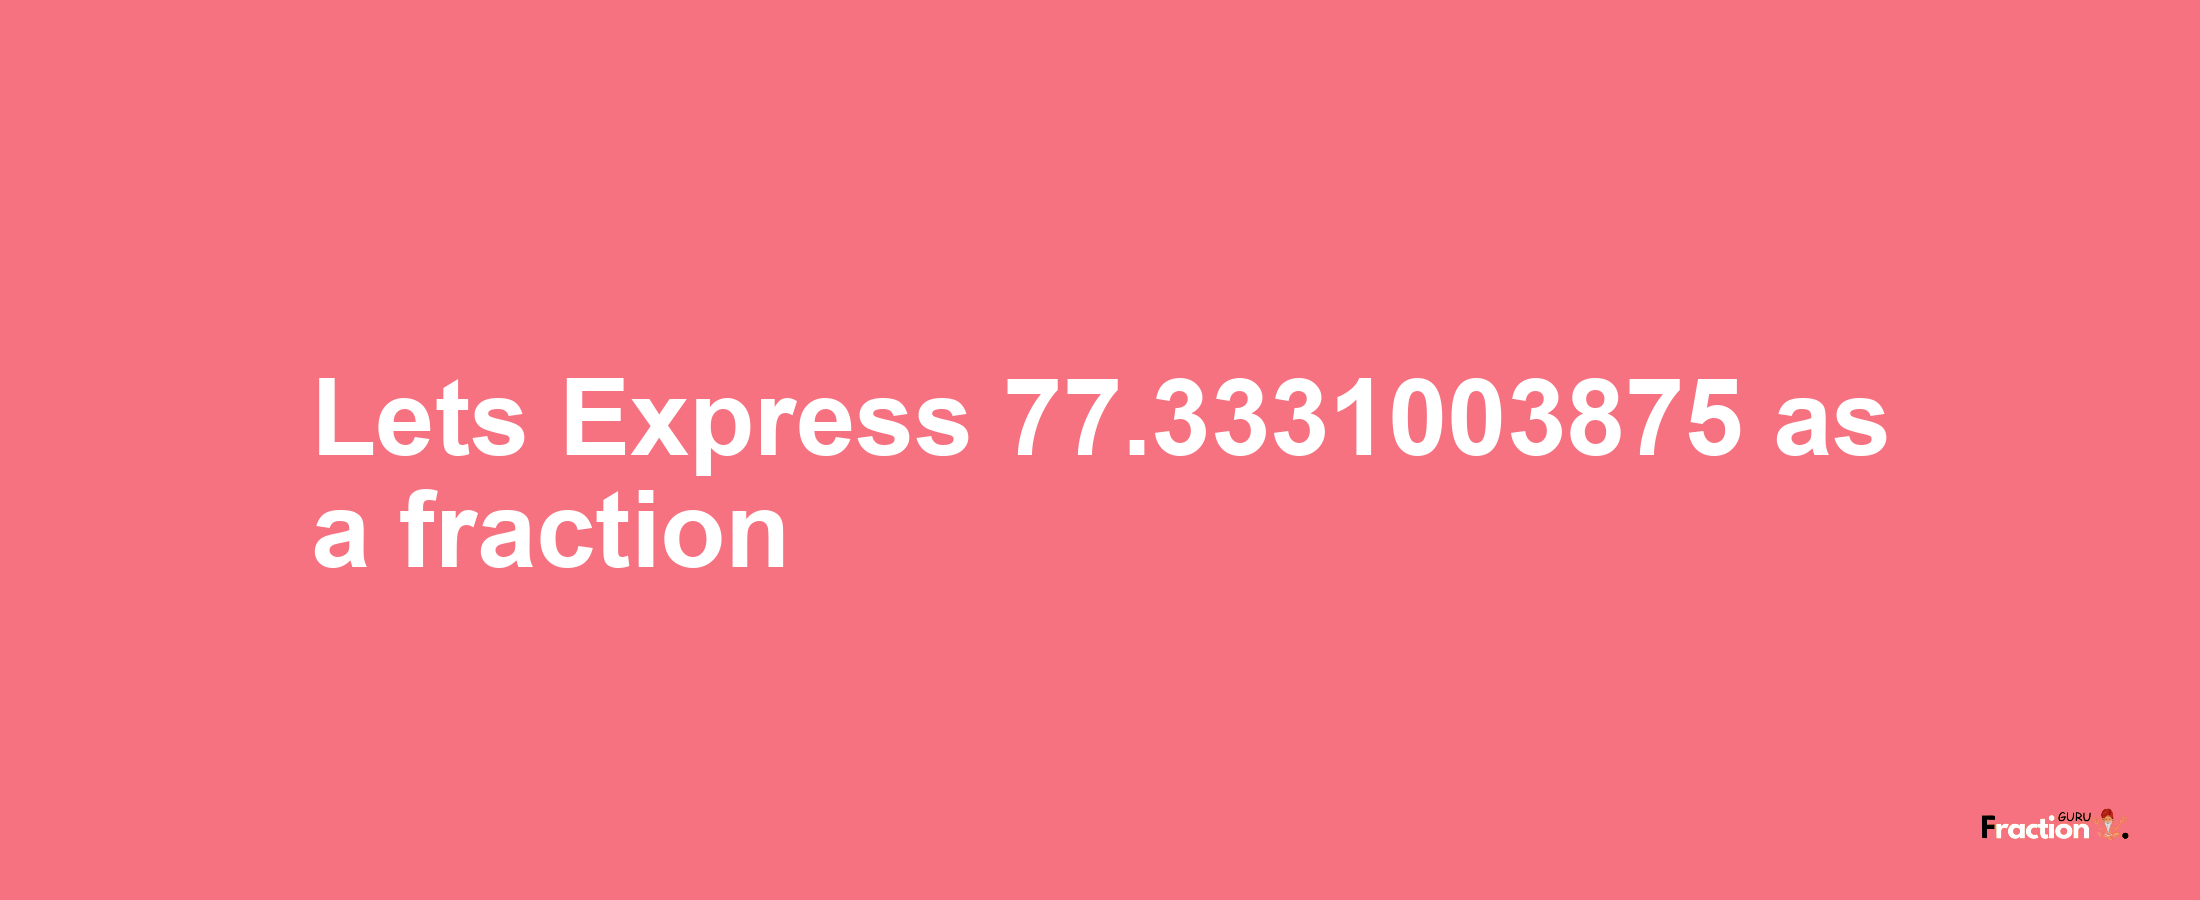 Lets Express 77.3331003875 as afraction